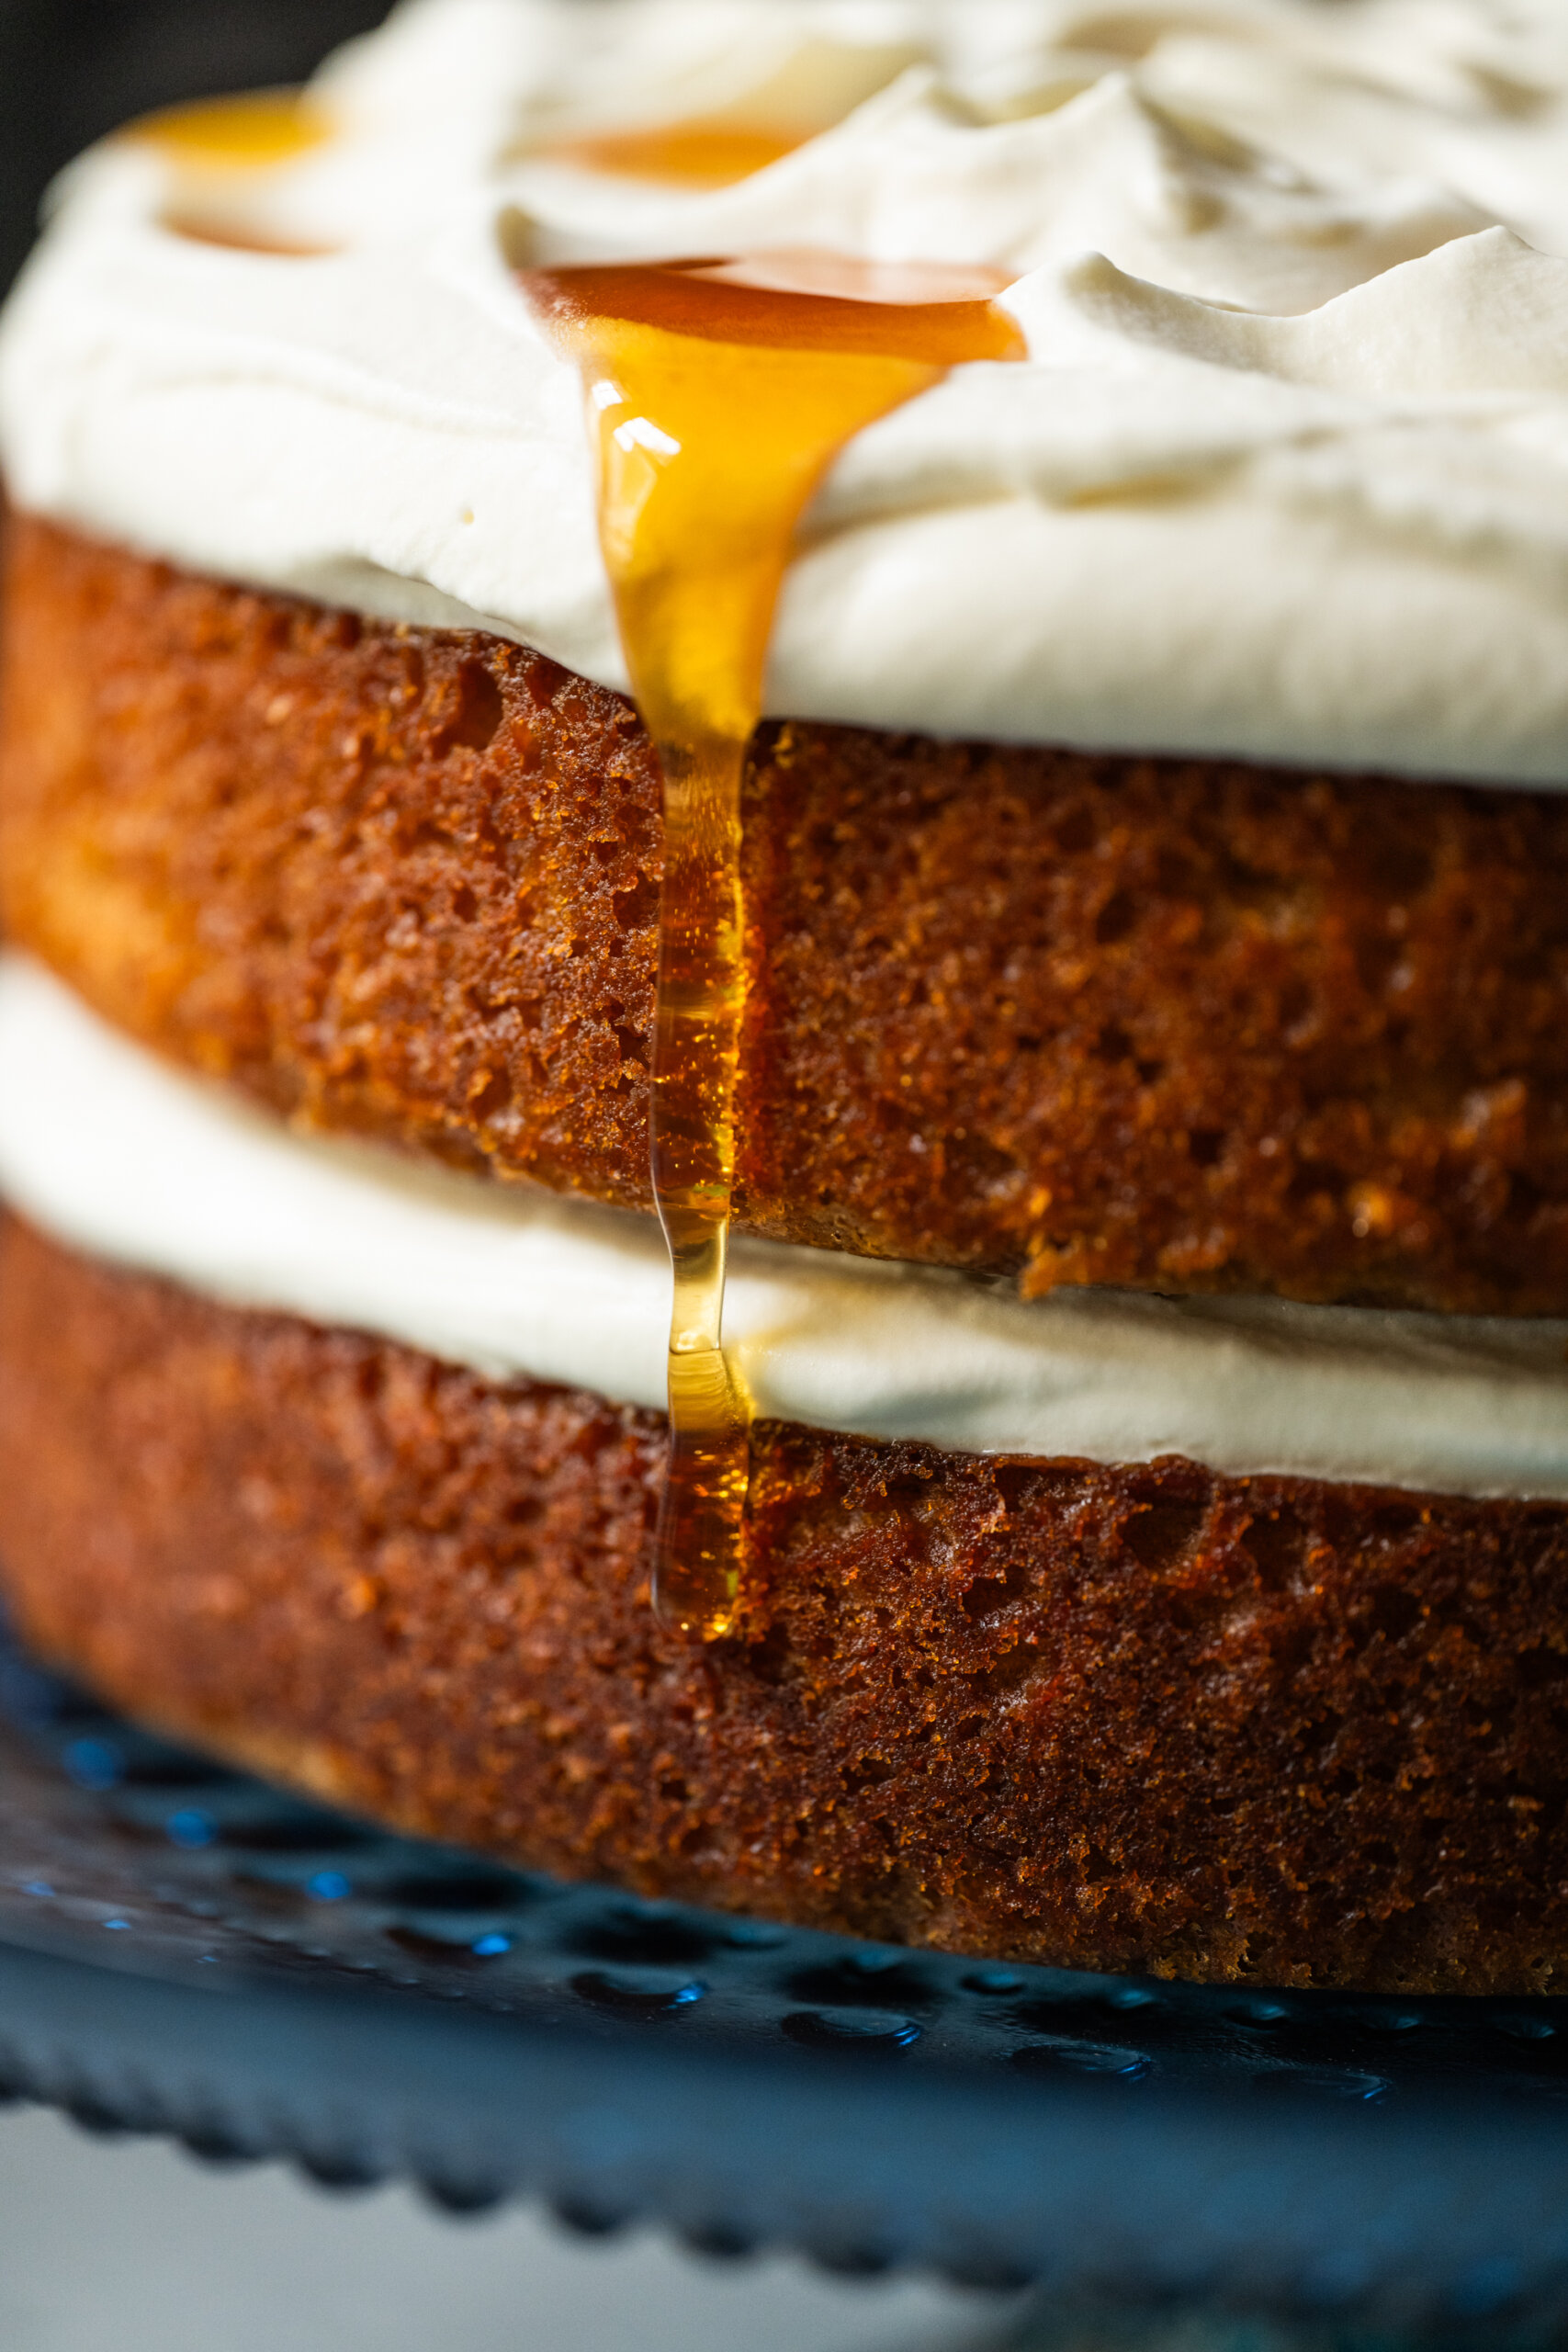 A drizzle of pure honey runs down the side of the finished cake